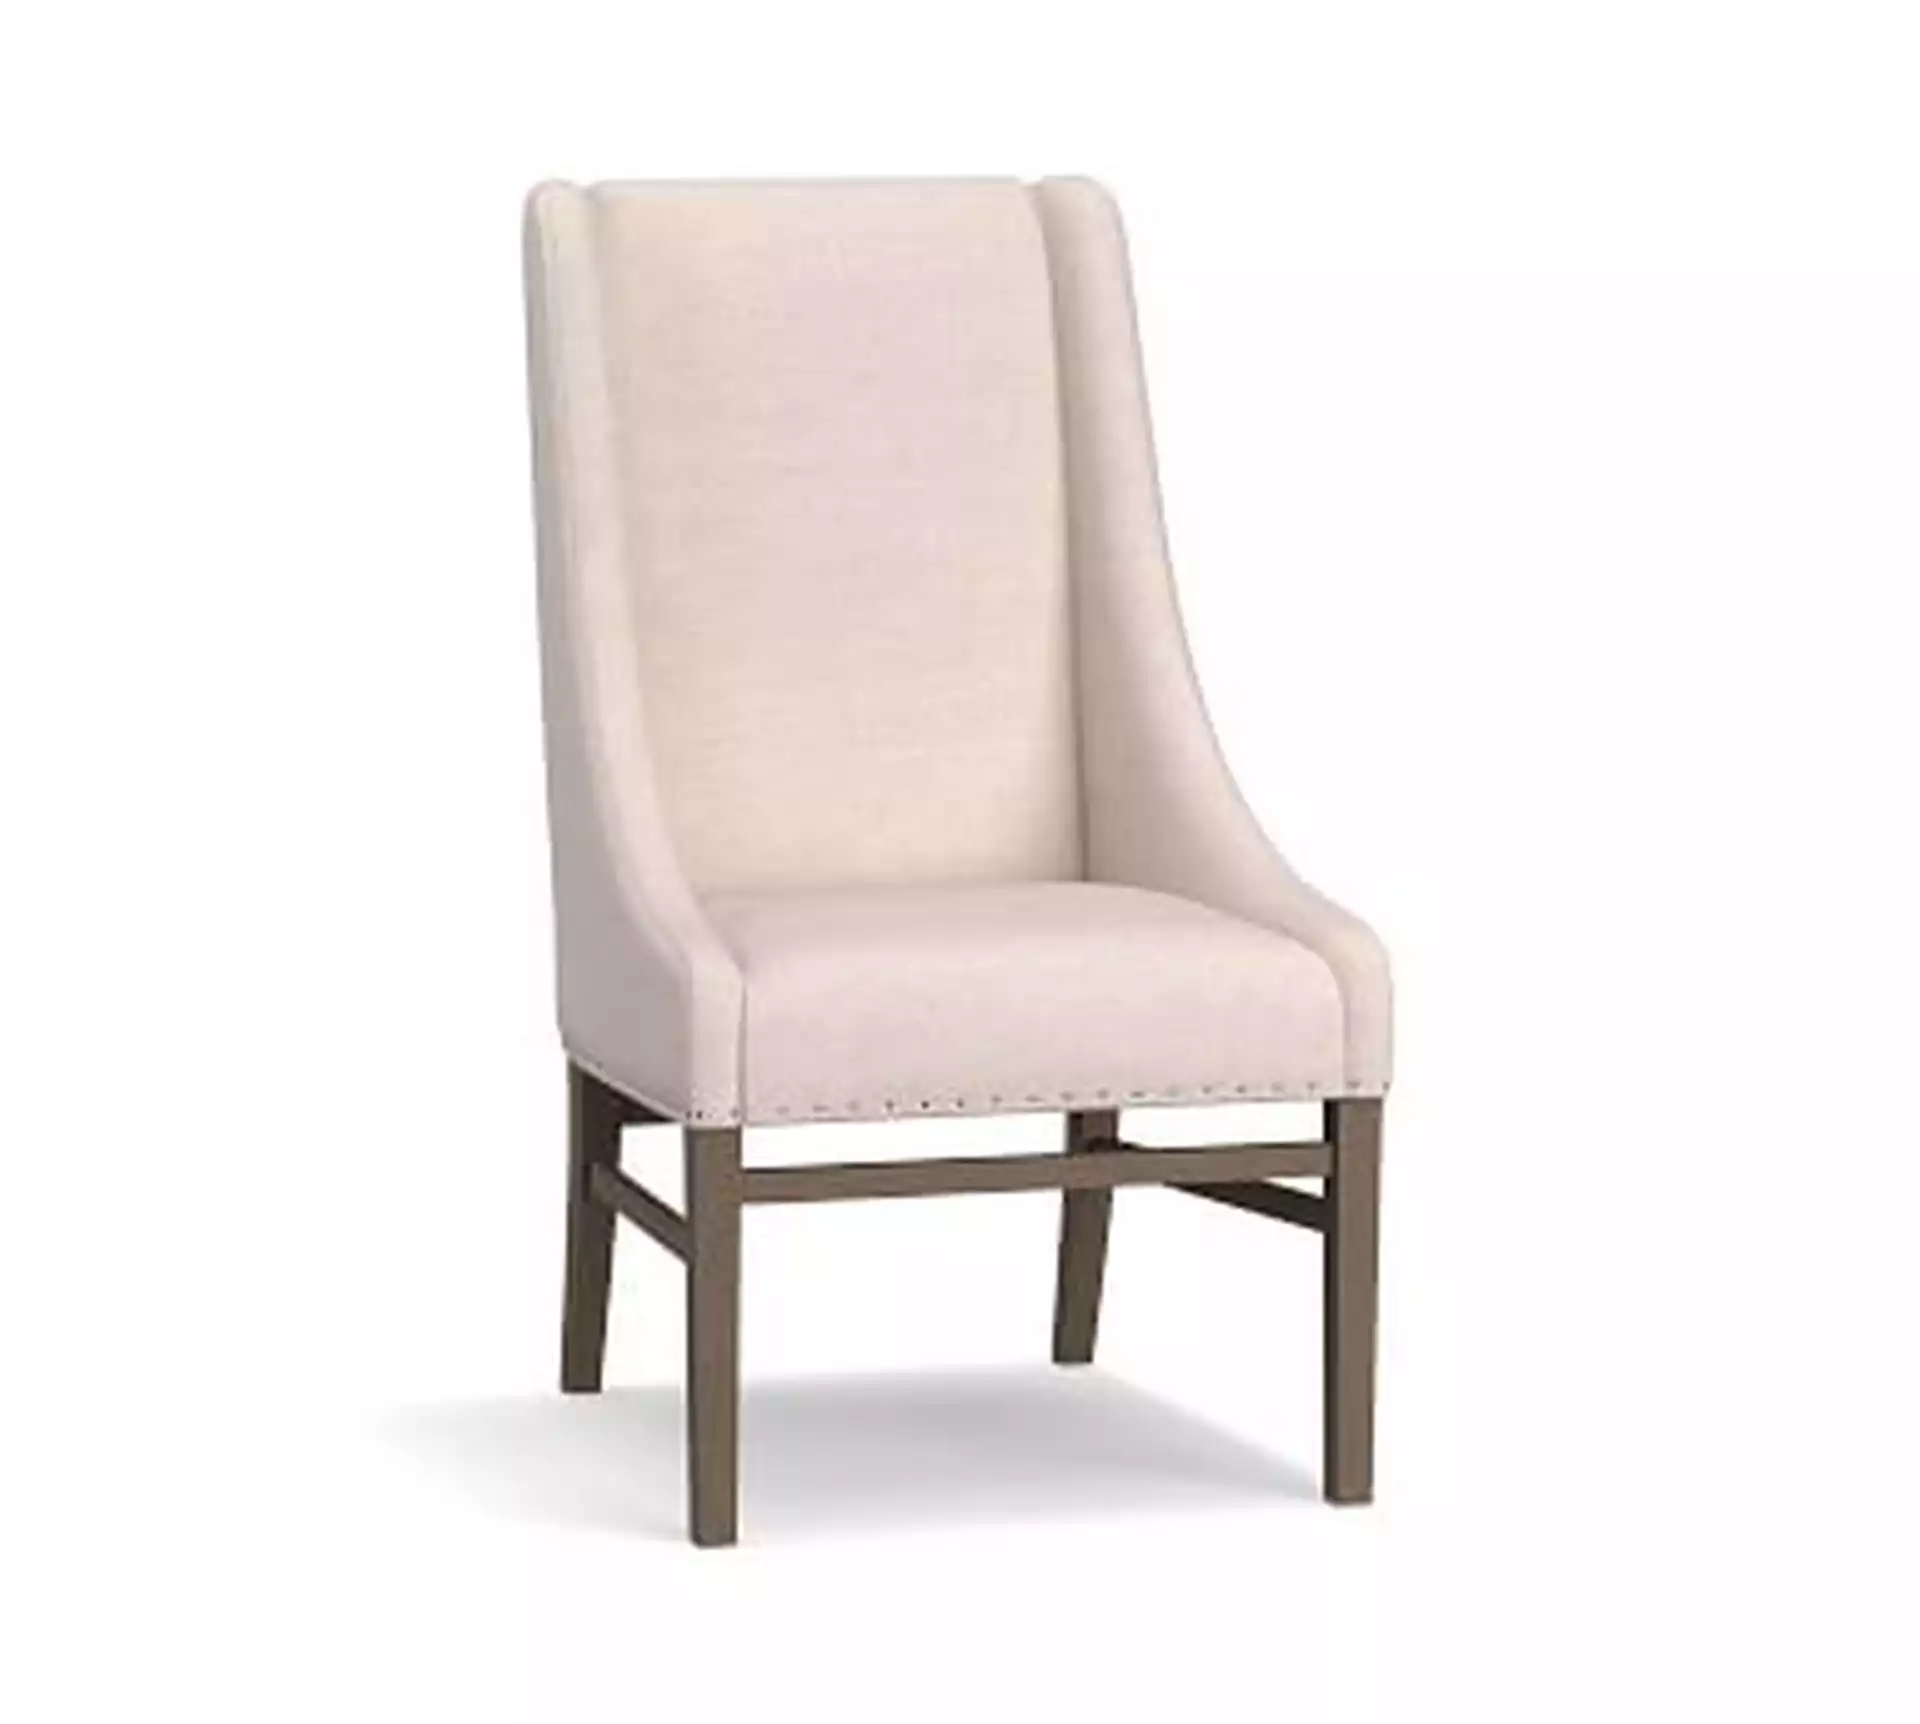 Milan Slope Arm Upholstered Dining Side Chair, Gray Wash Leg, Performance Heathered Tweed Ivory